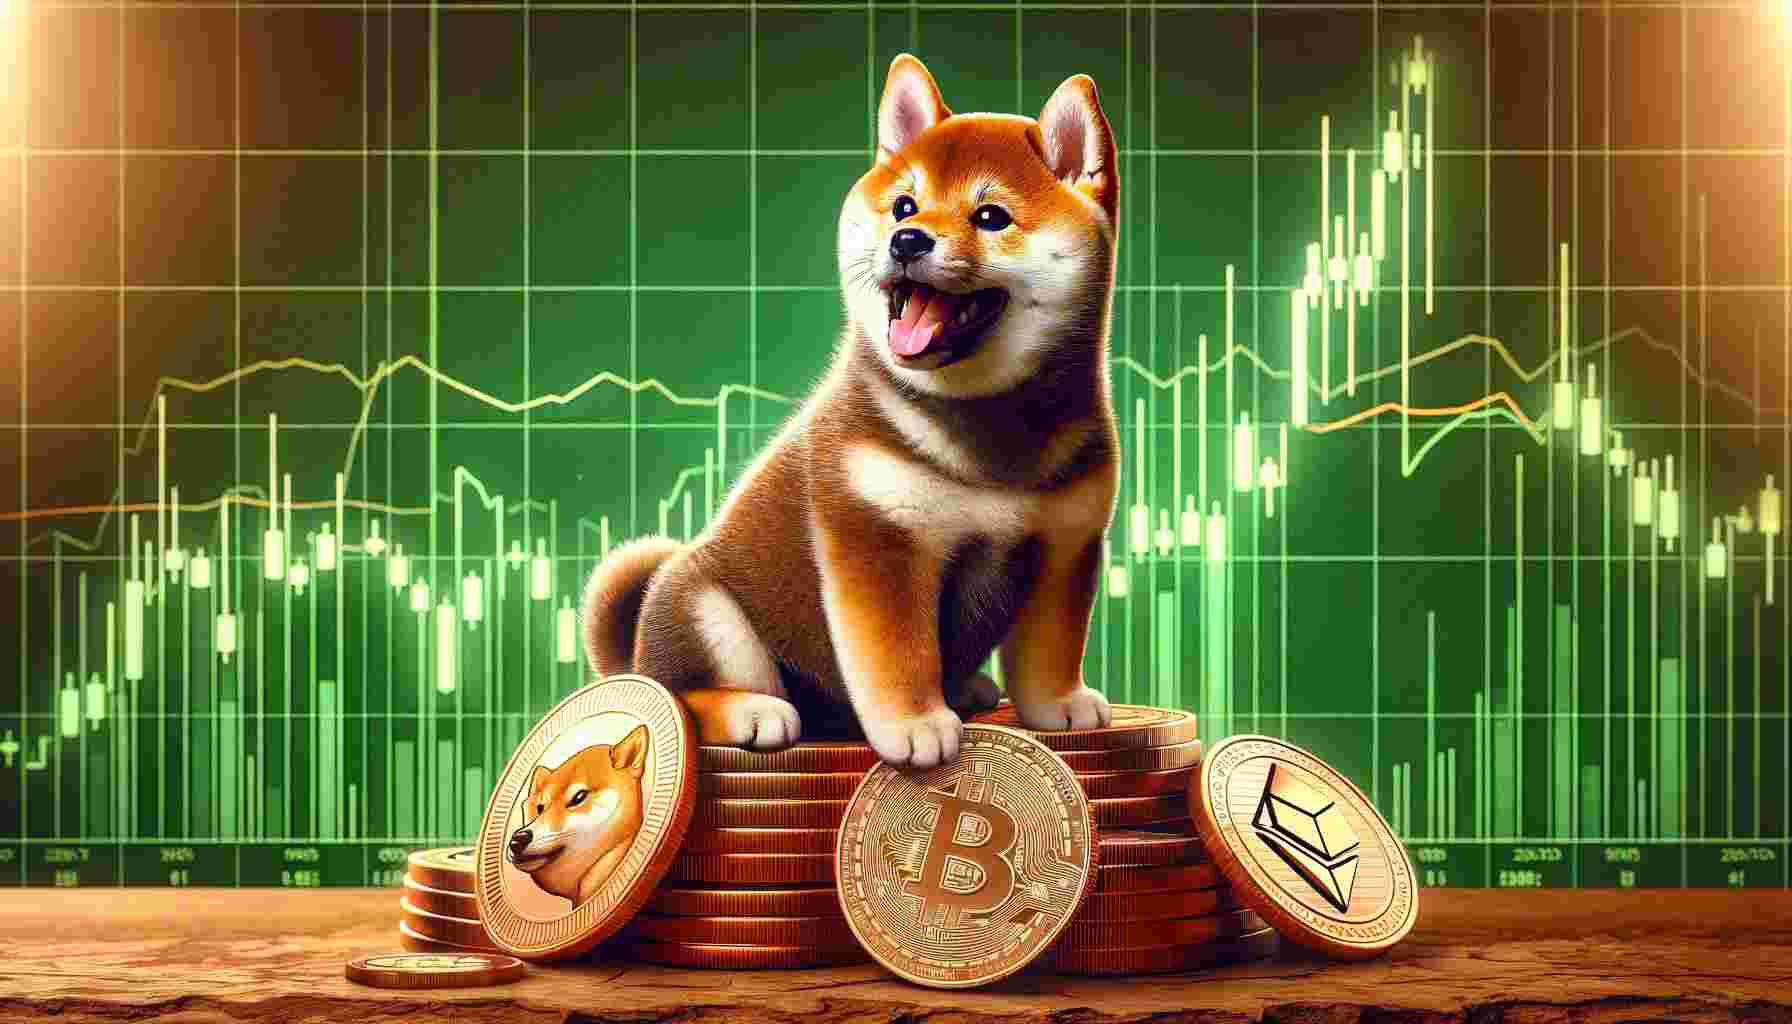 SHIB’s bull run might continue, but on THIS condition - AMBCrypto